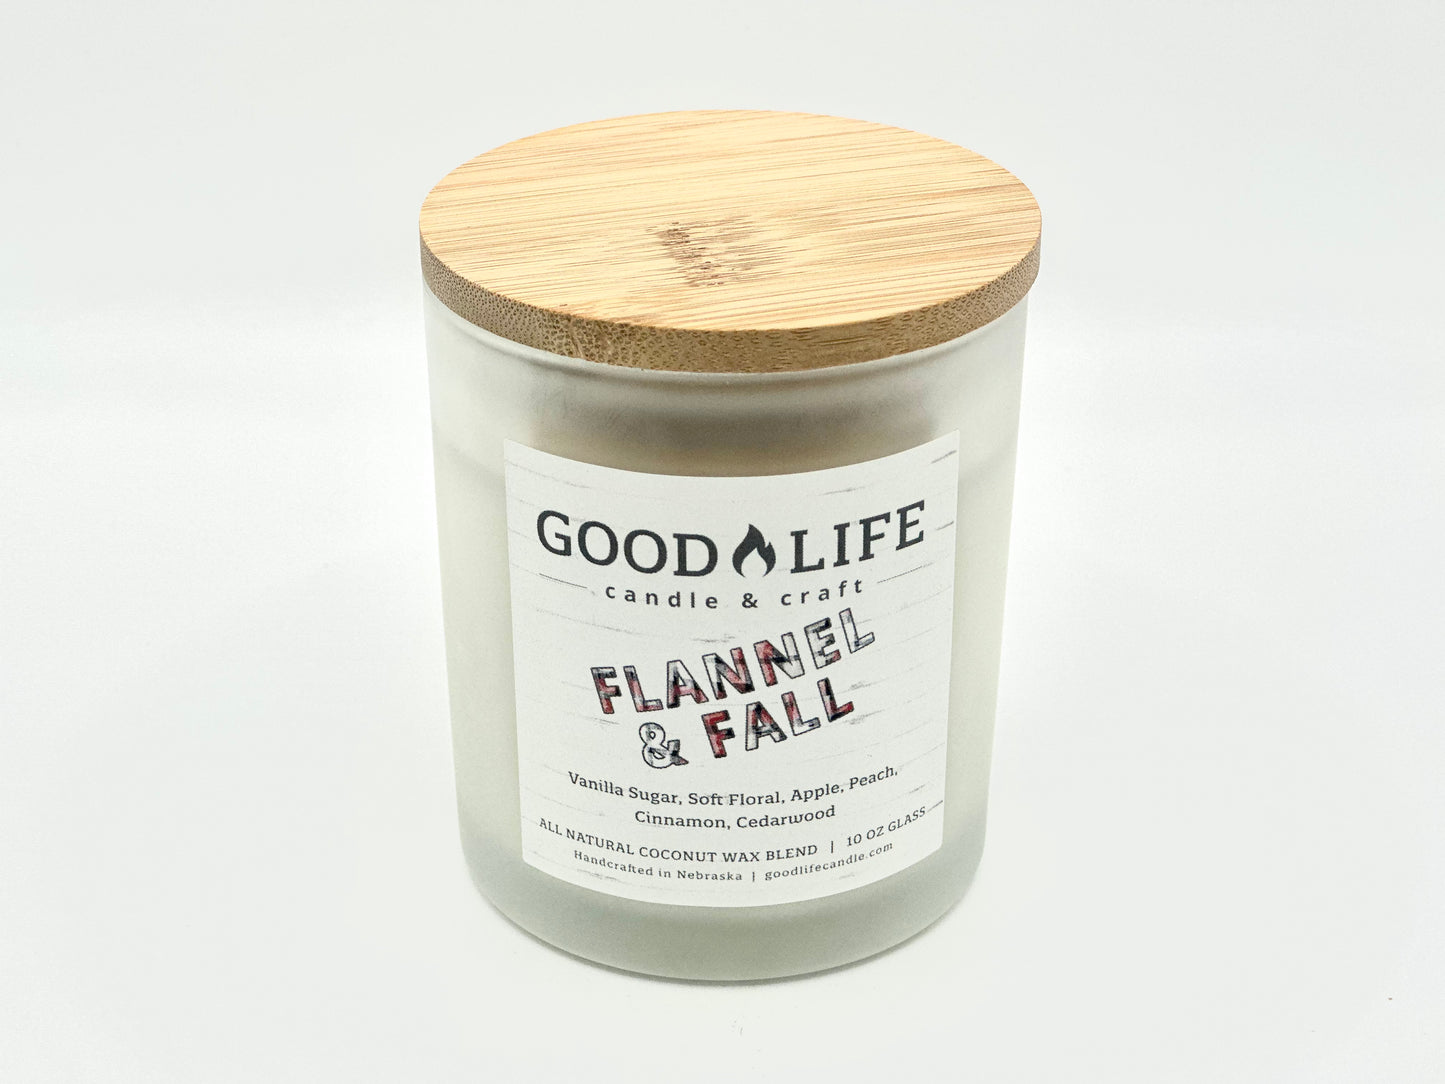 Flannel & Fall Scented Candle